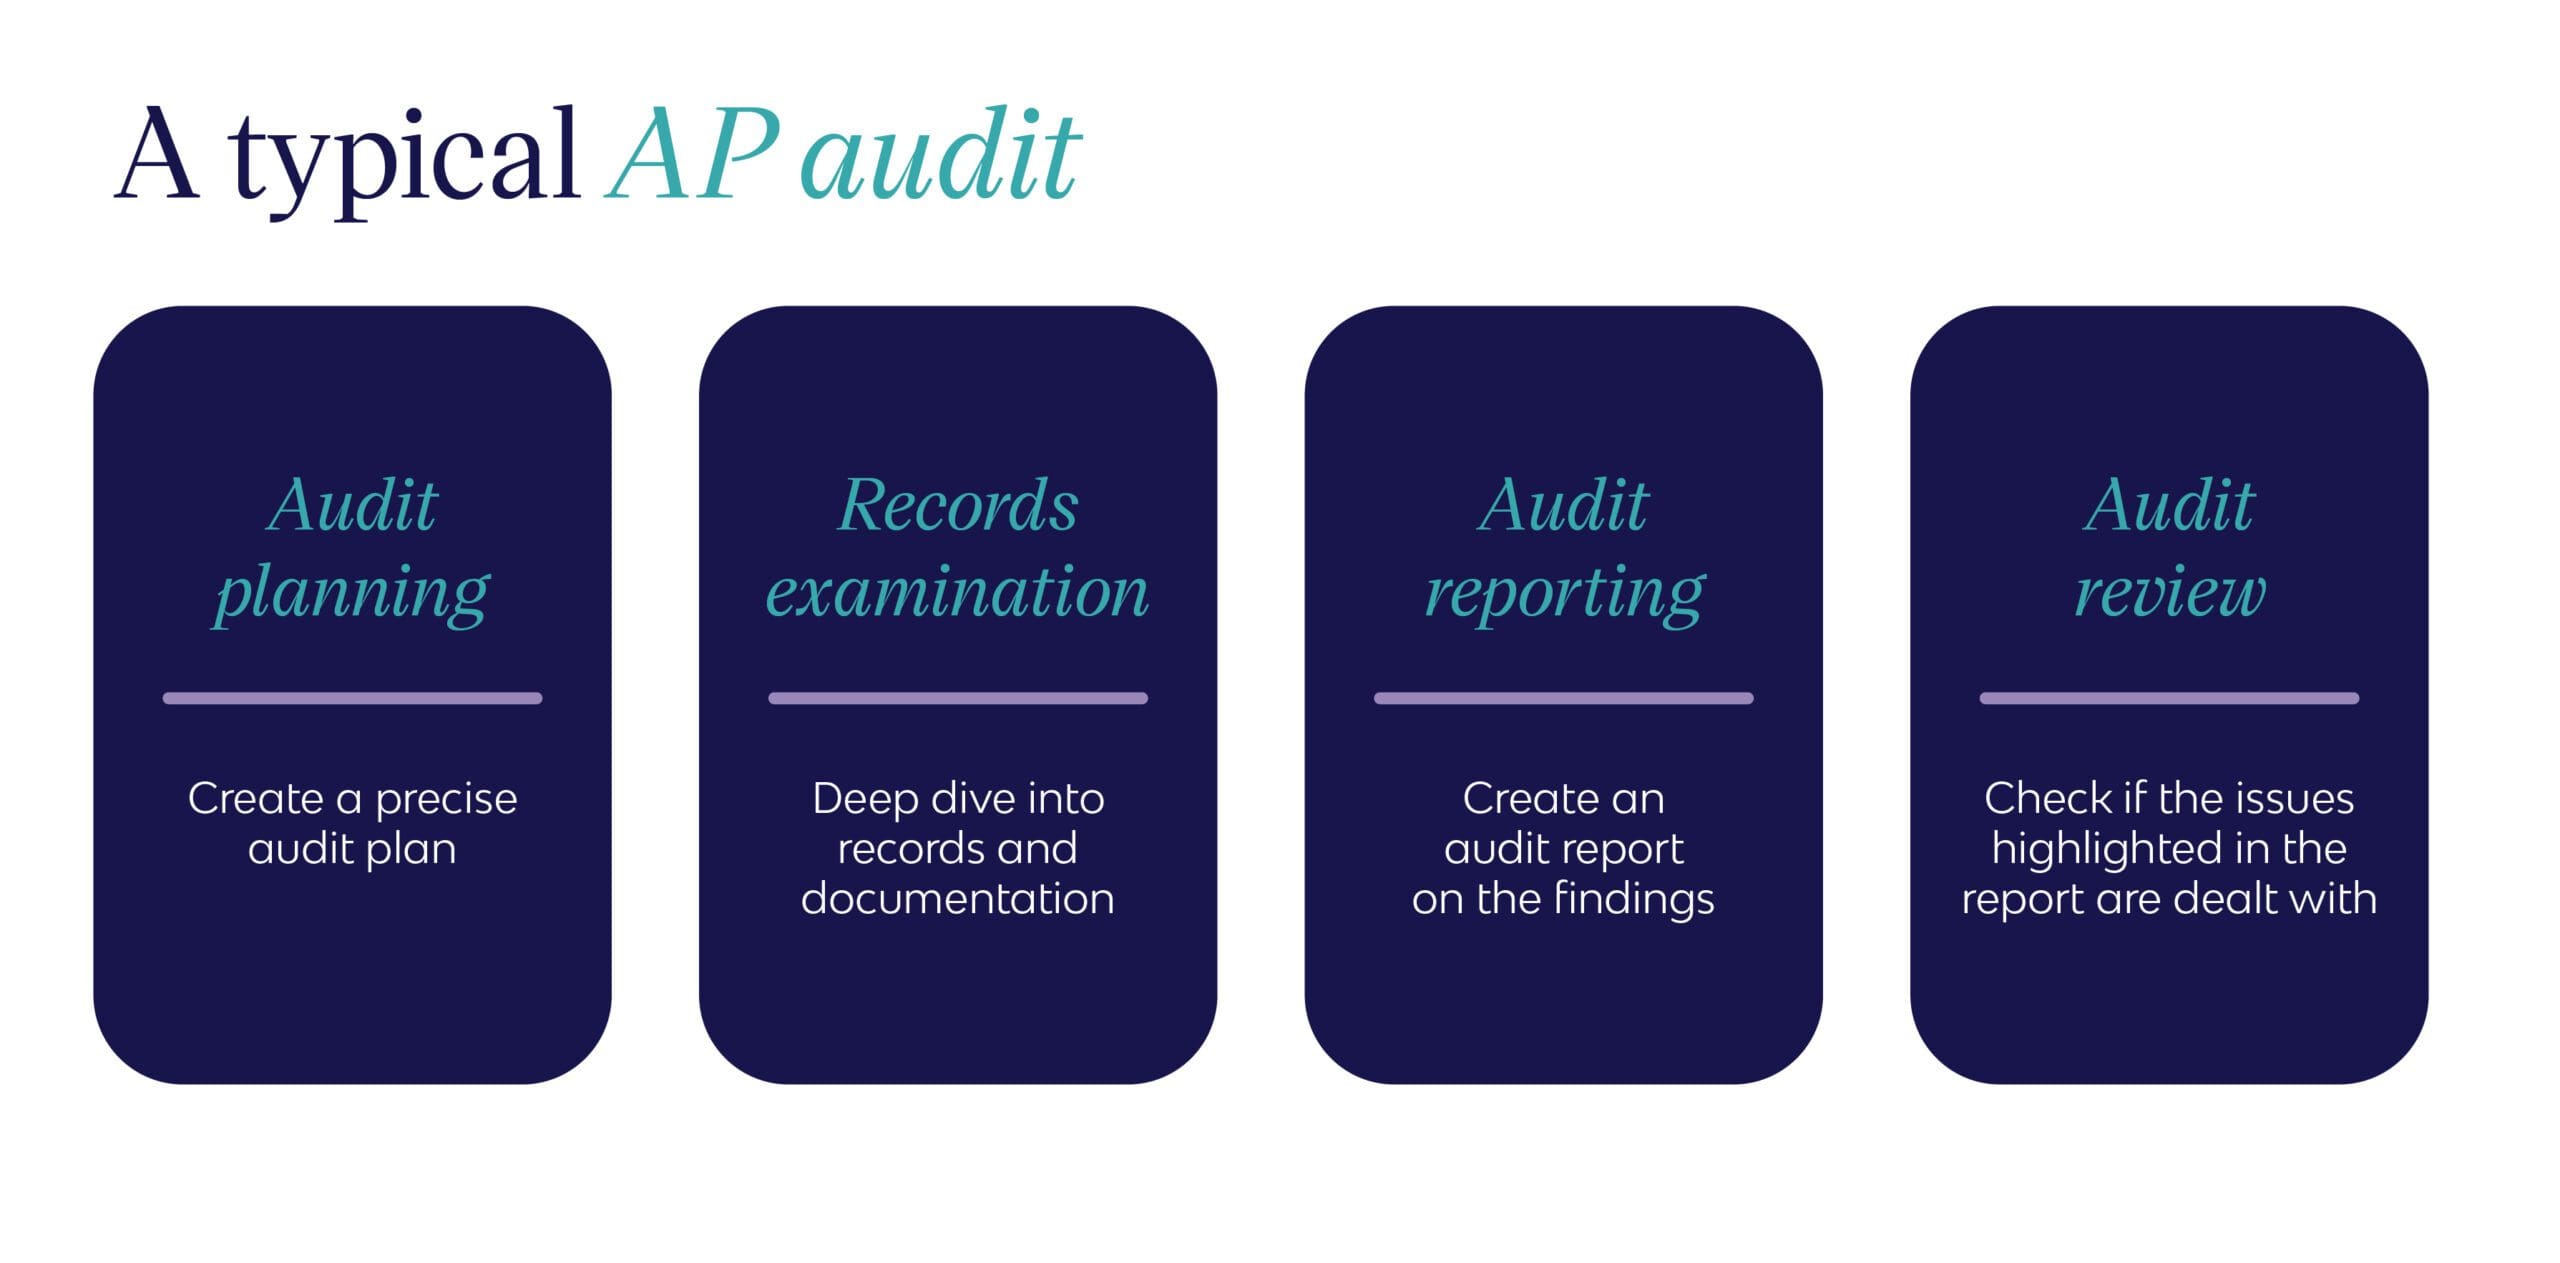 A typical accounts payable audit procedure including planning, records examination, reporting, and review.